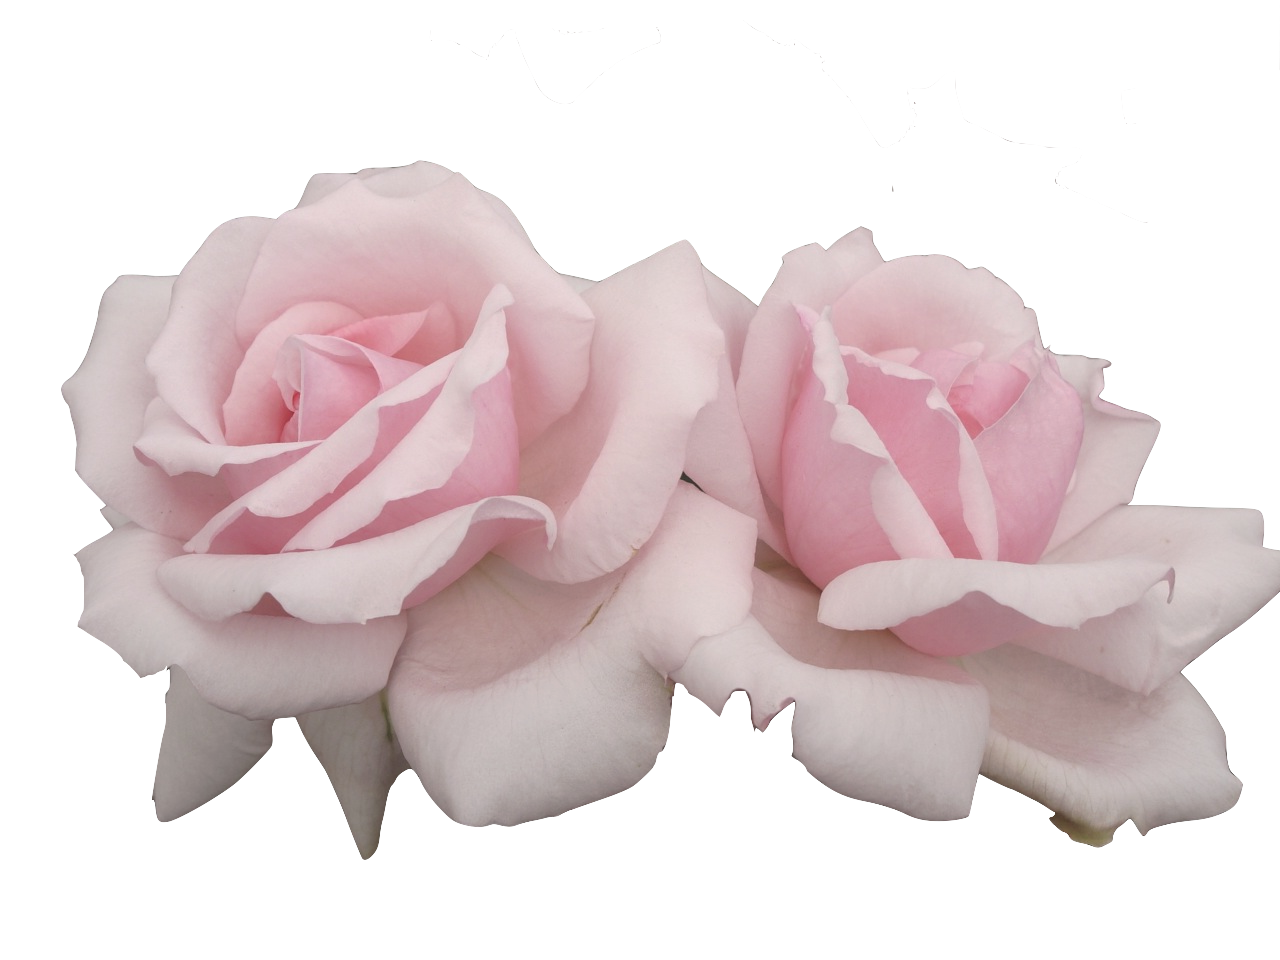 Rose clipart aesthetic, Rose aesthetic Transparent FREE ...